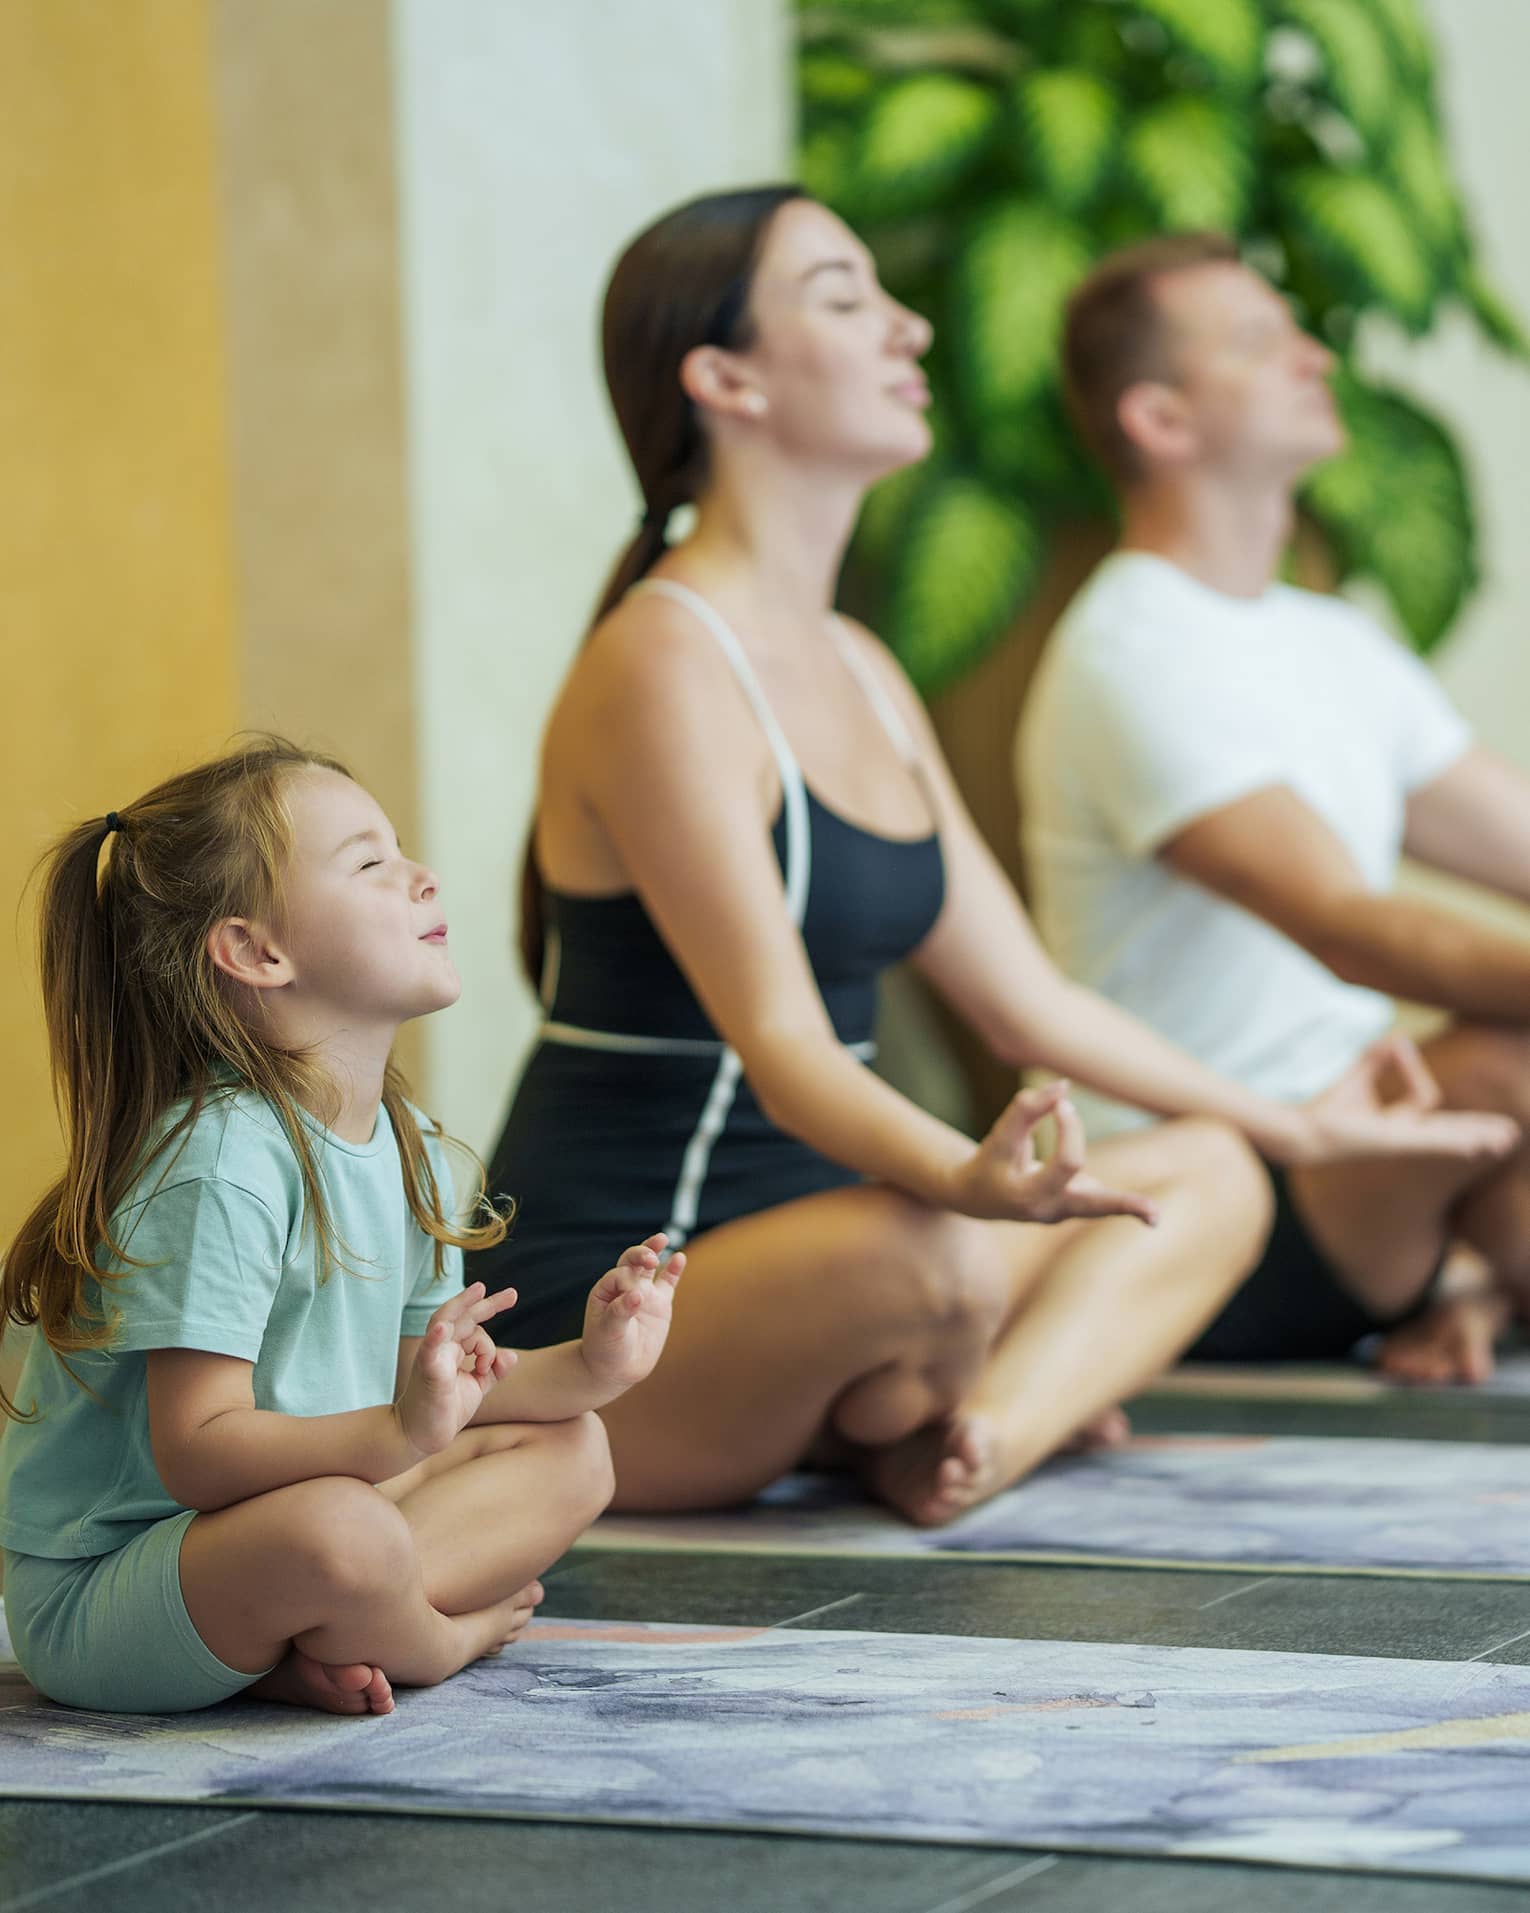 Two adults and one child each sit on a yoga mat with their legs crossed, eyes closed and hands held on their knees